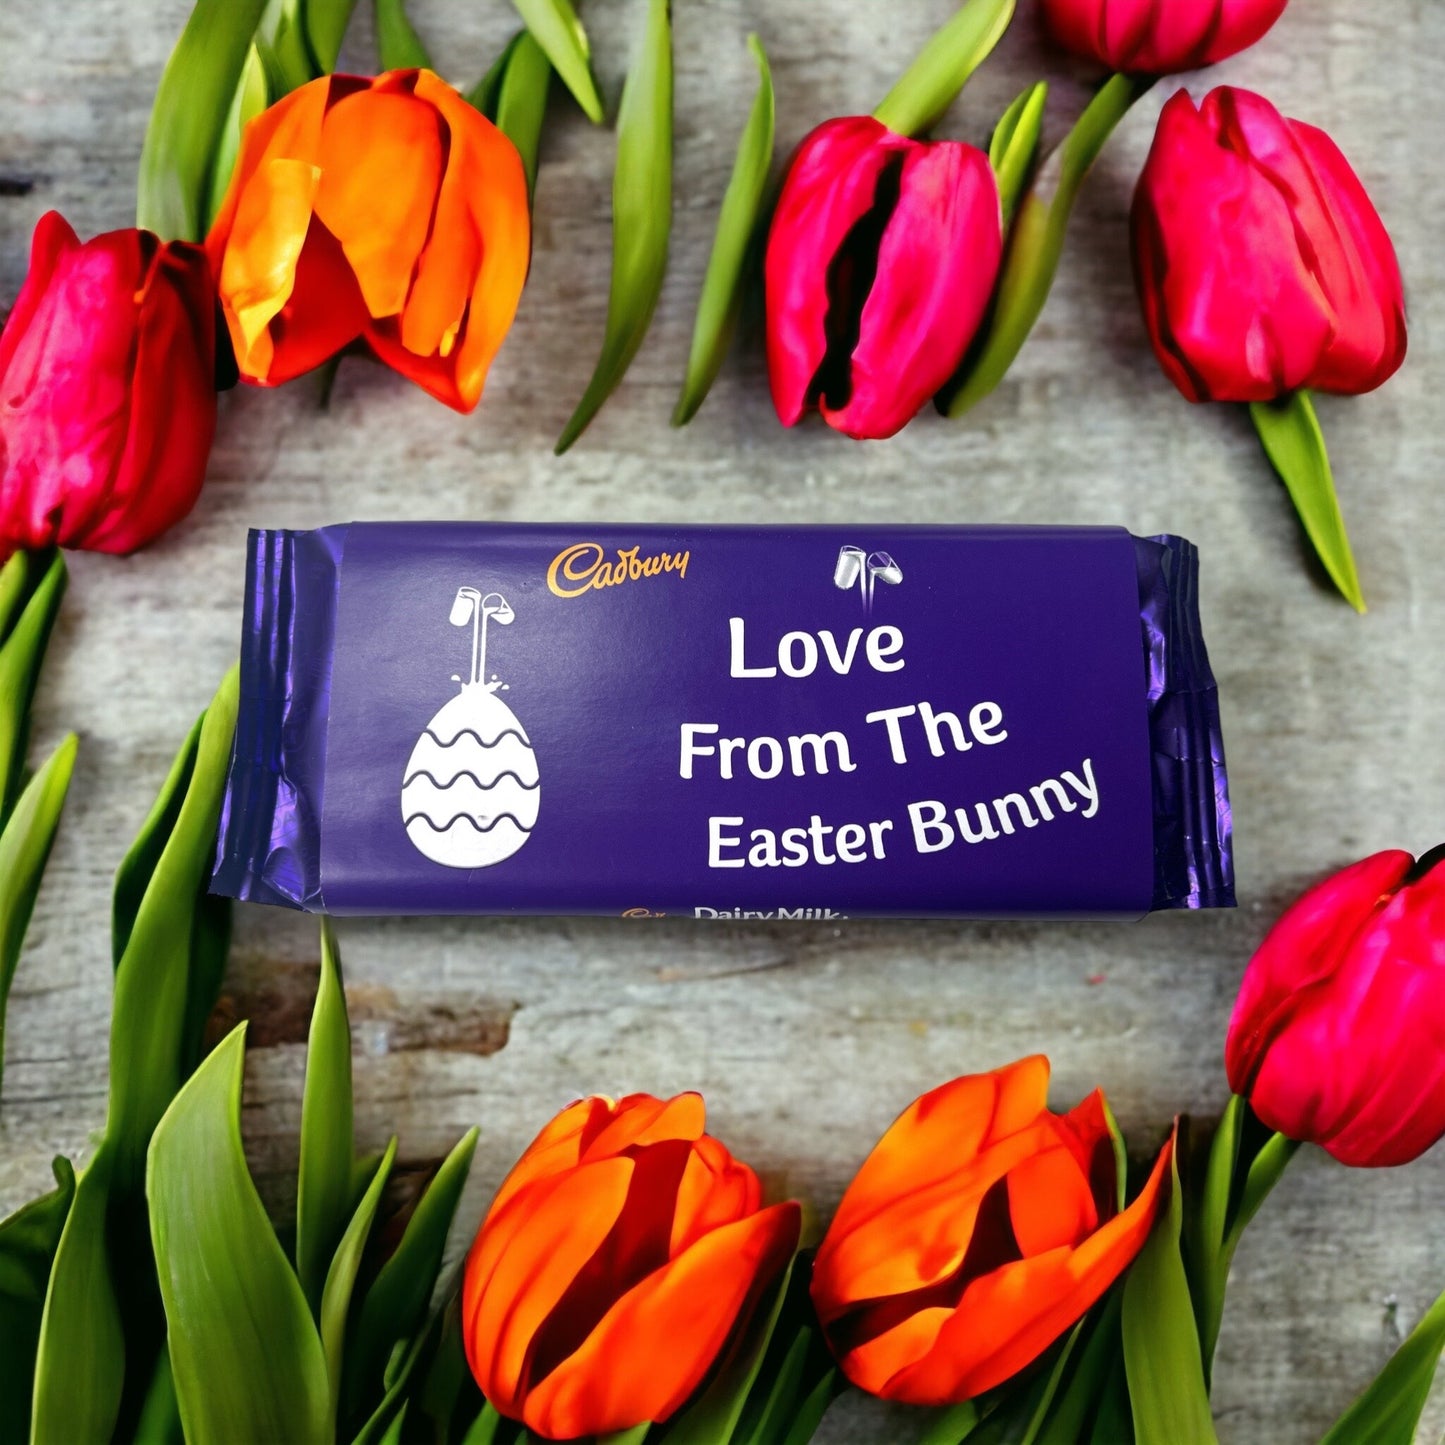 Love From The Easter Bunny - Cadbury Dairy Milk (Various Flavours)